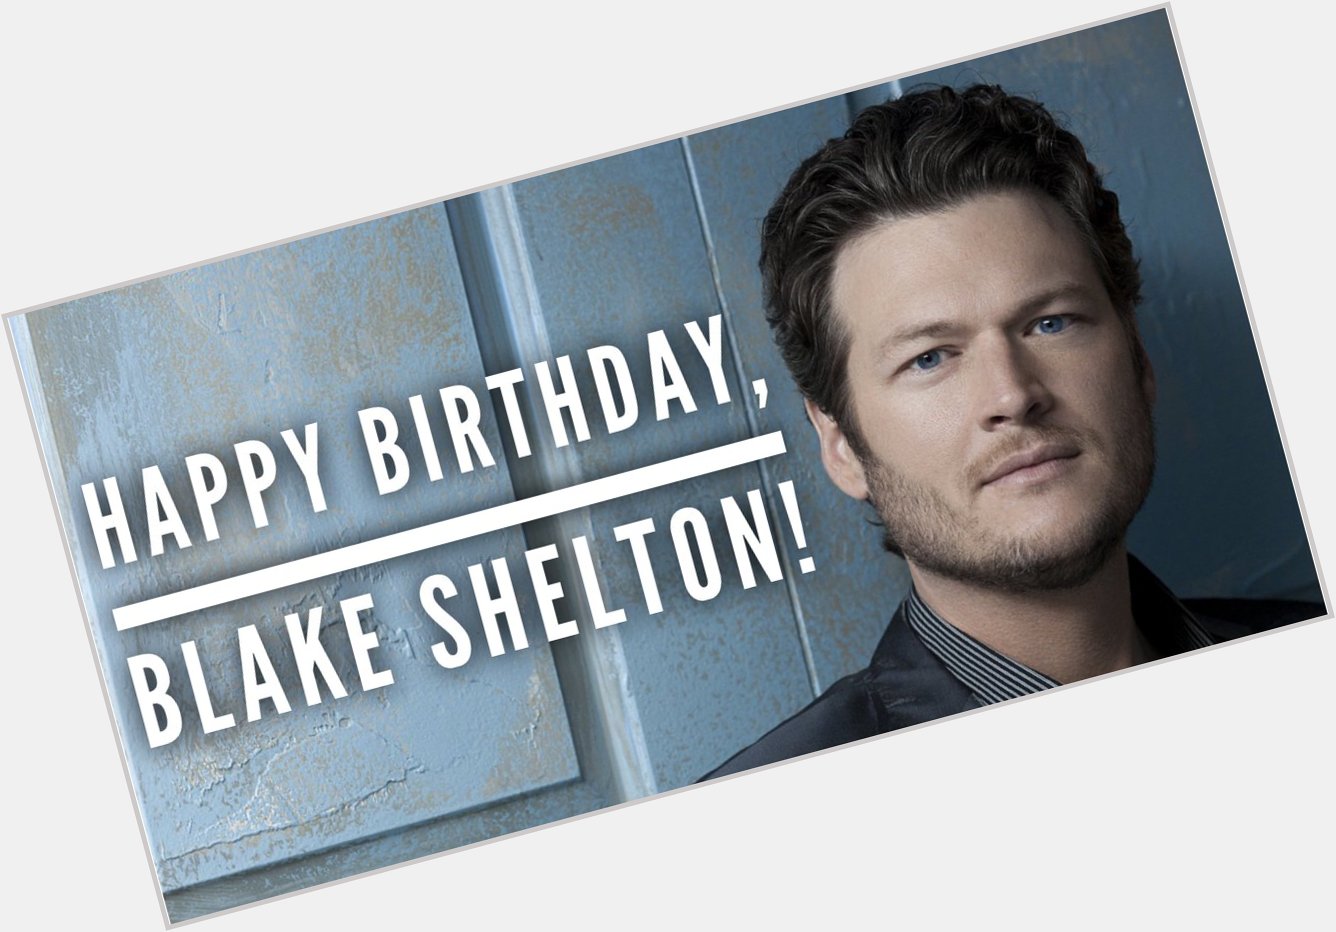 Happy Birthday to Blake Shelton! What s your favorite of his country hits?  